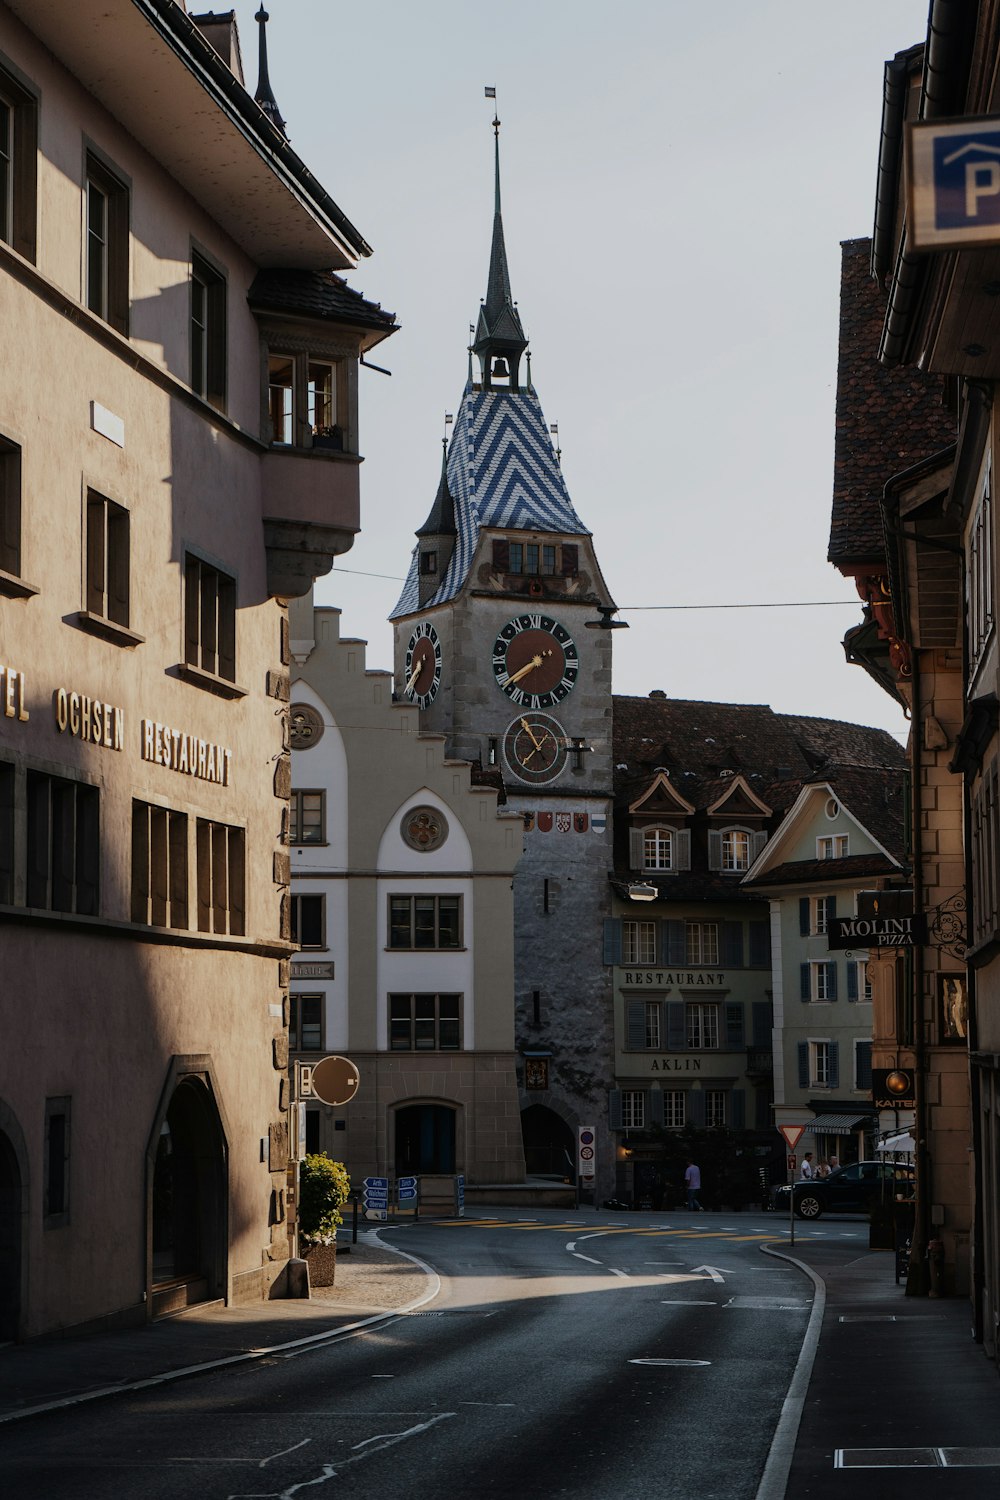 a clock tower on the side of a building